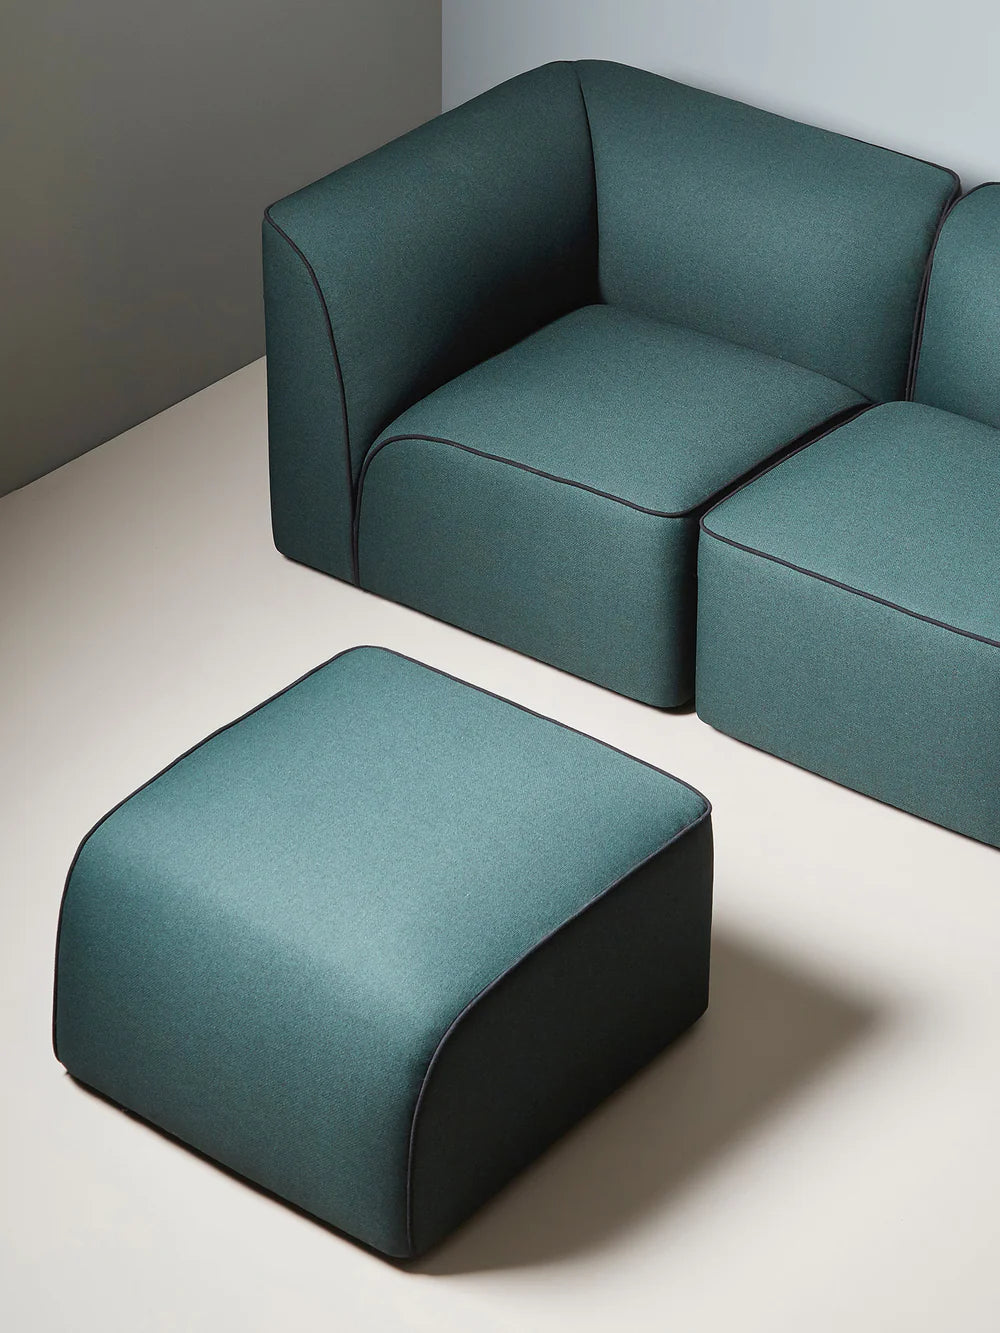 Pouf - Flora sofa in many colors and fabrics